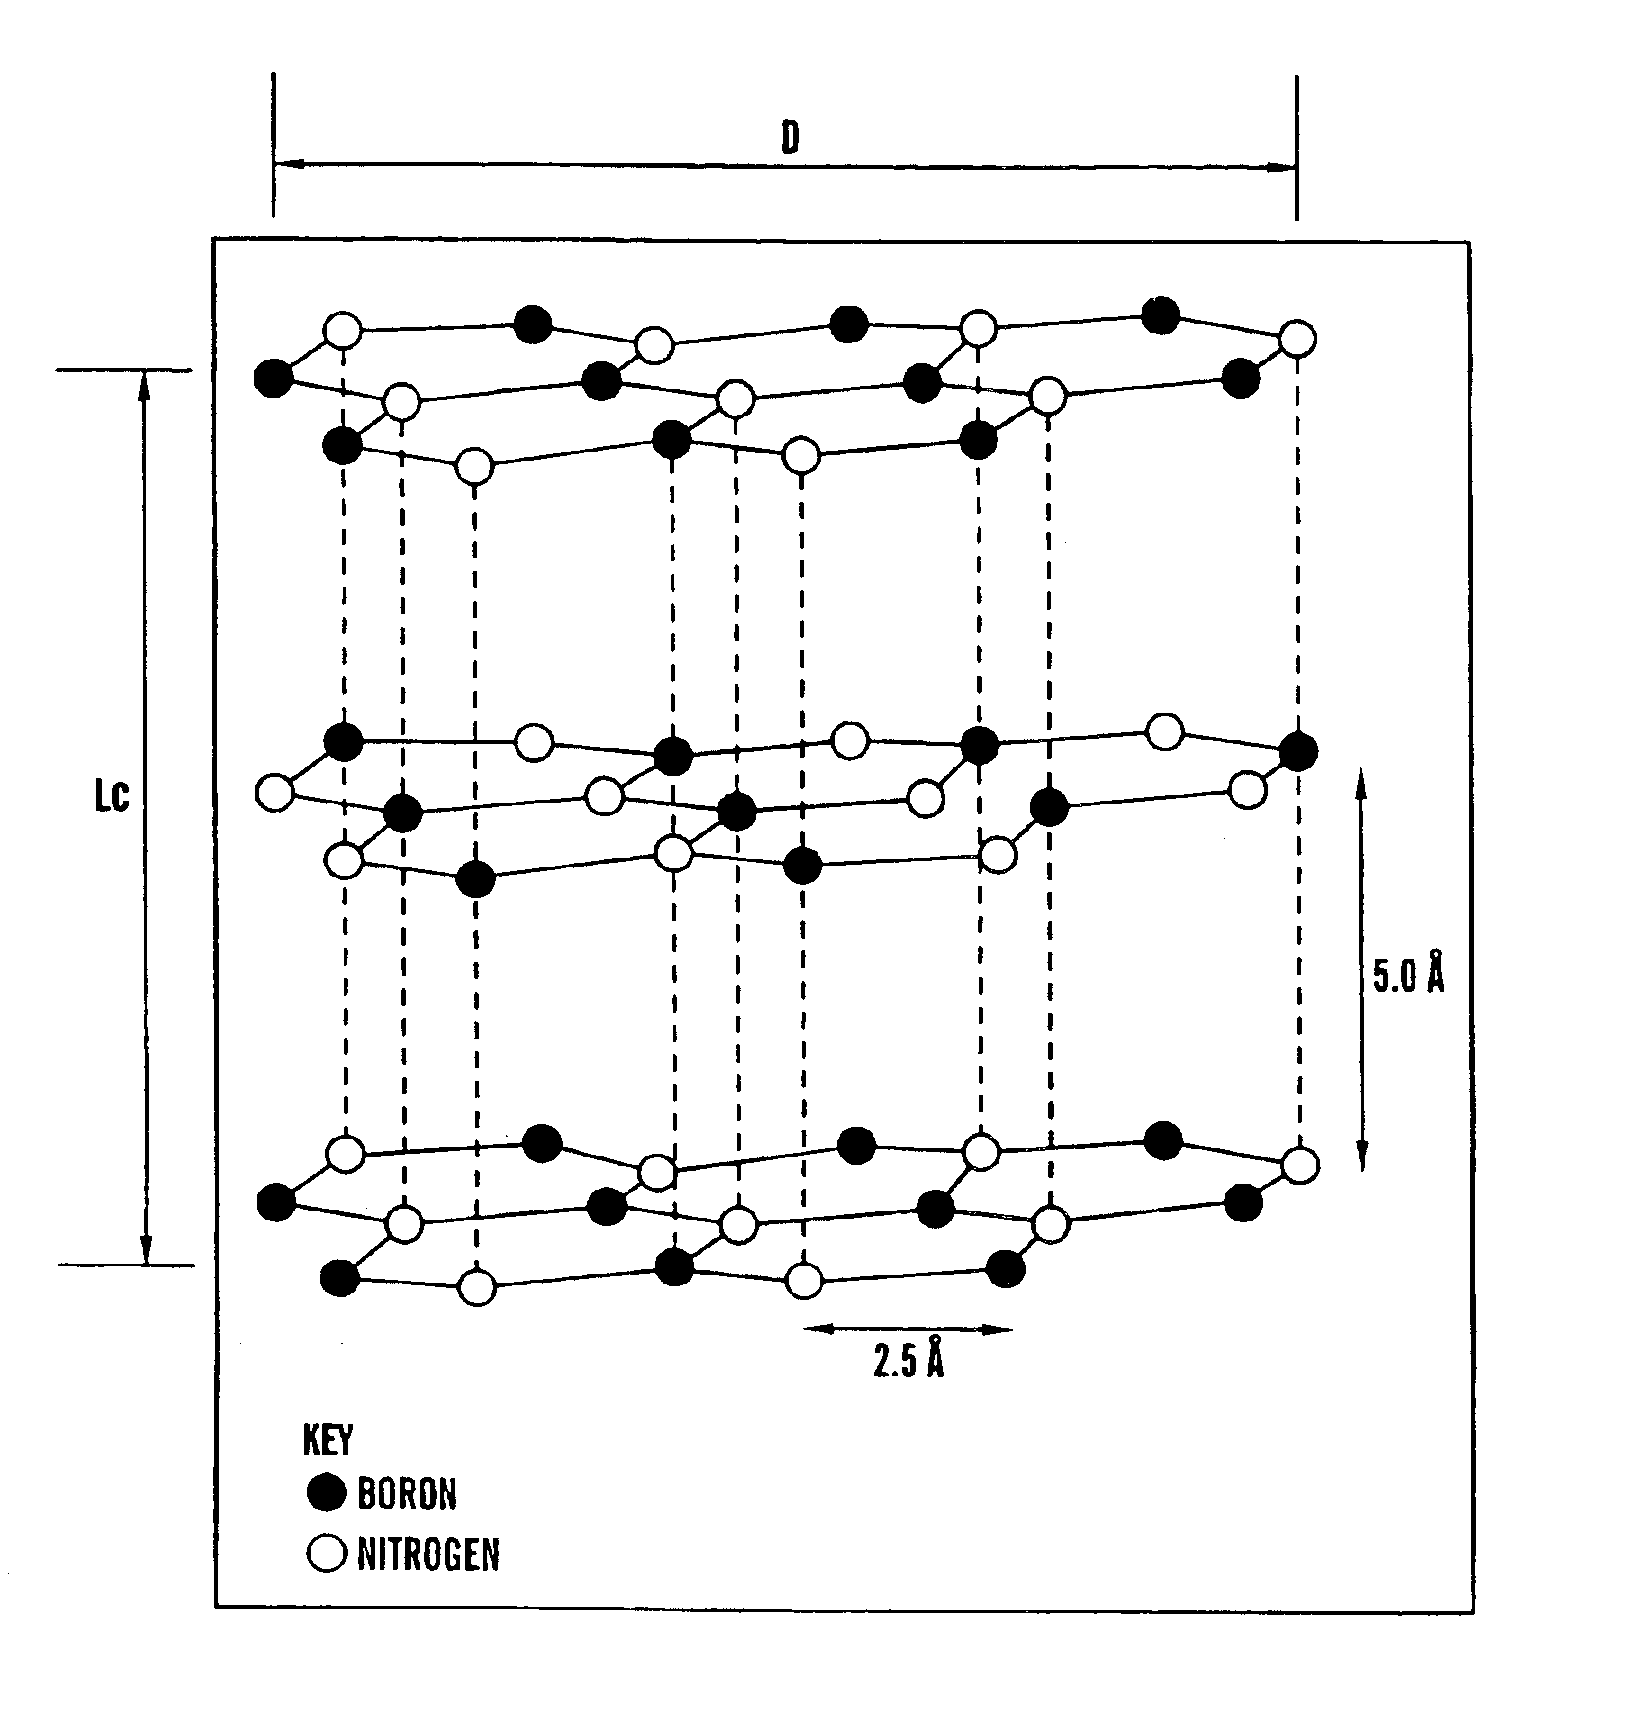 Highly delaminated hexagonal boron nitride powders, process for making, and uses thereof